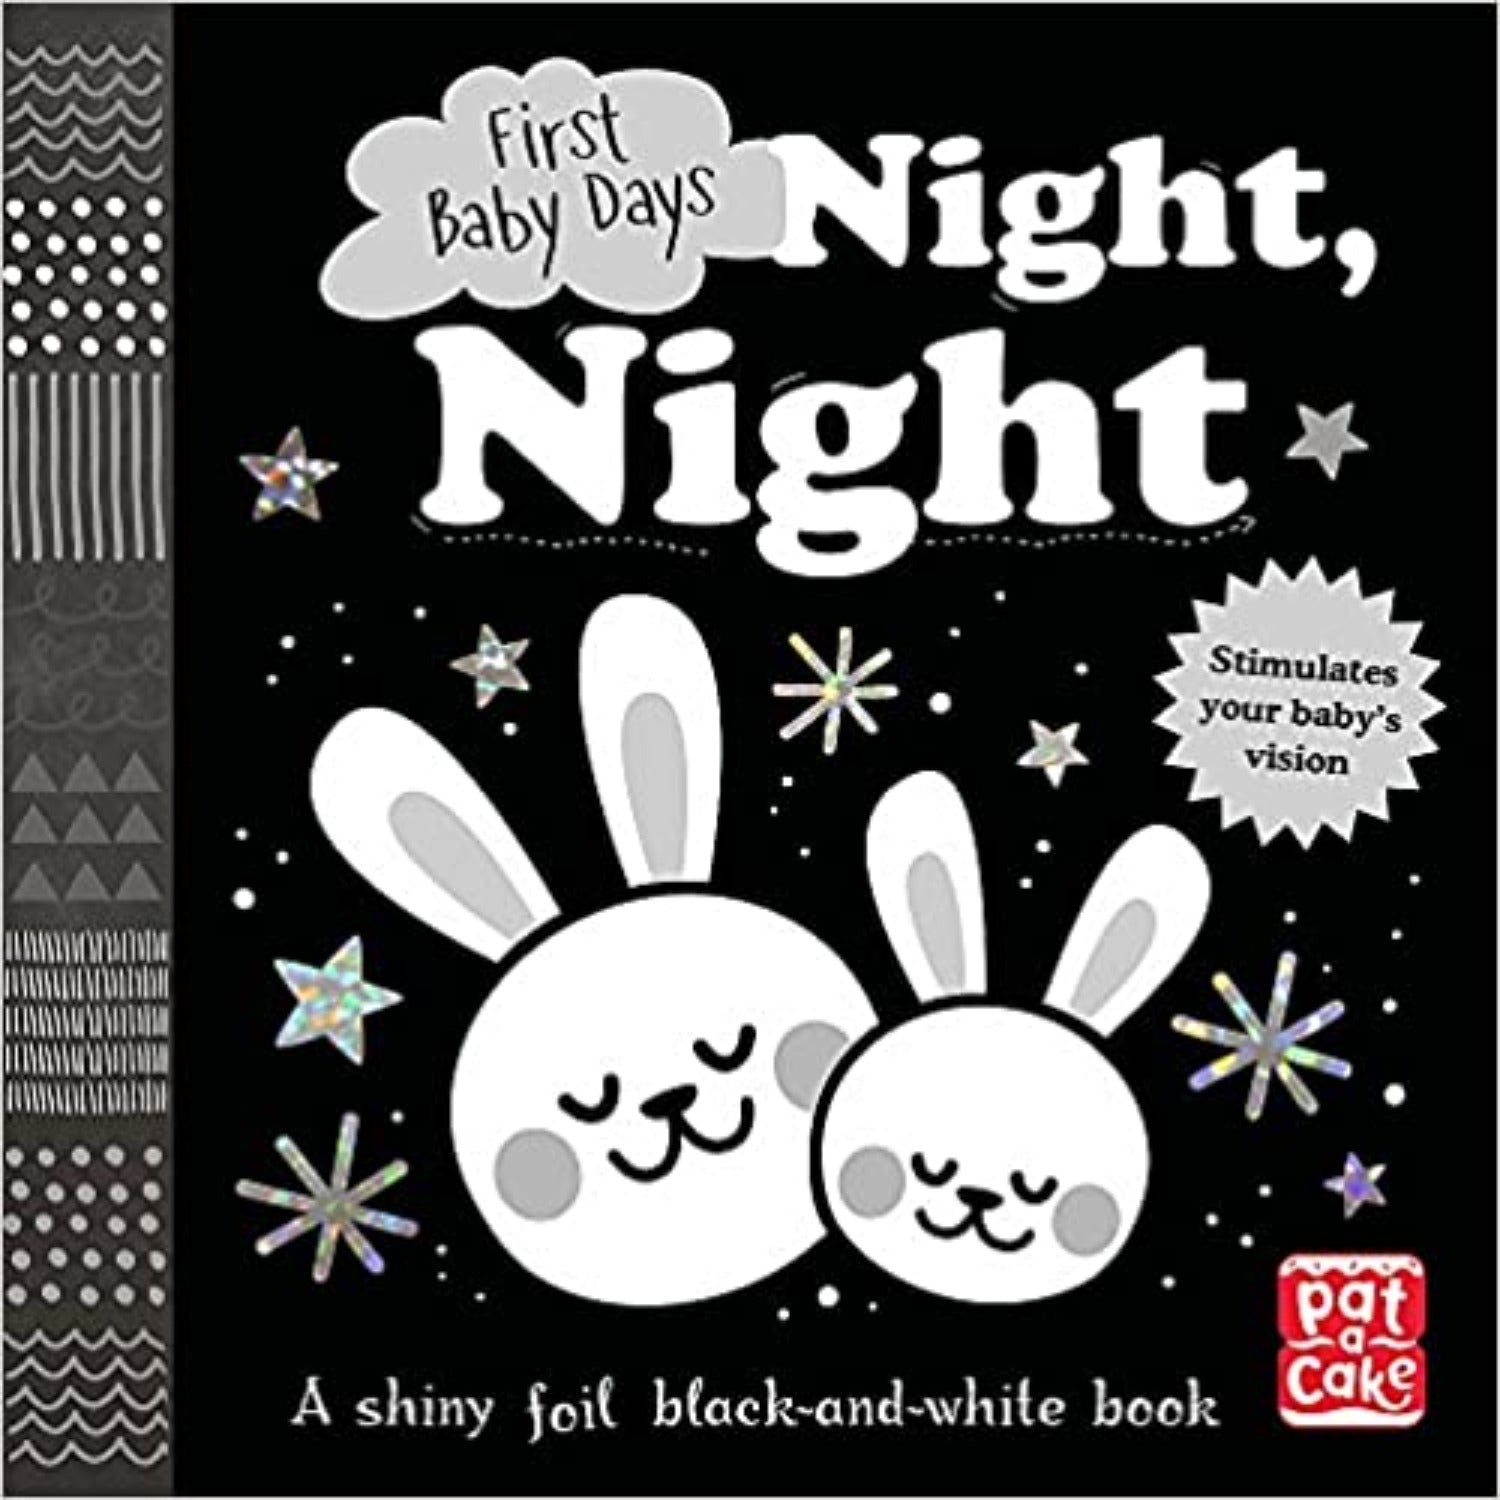 black and white/high contrast board book for newborn babies.